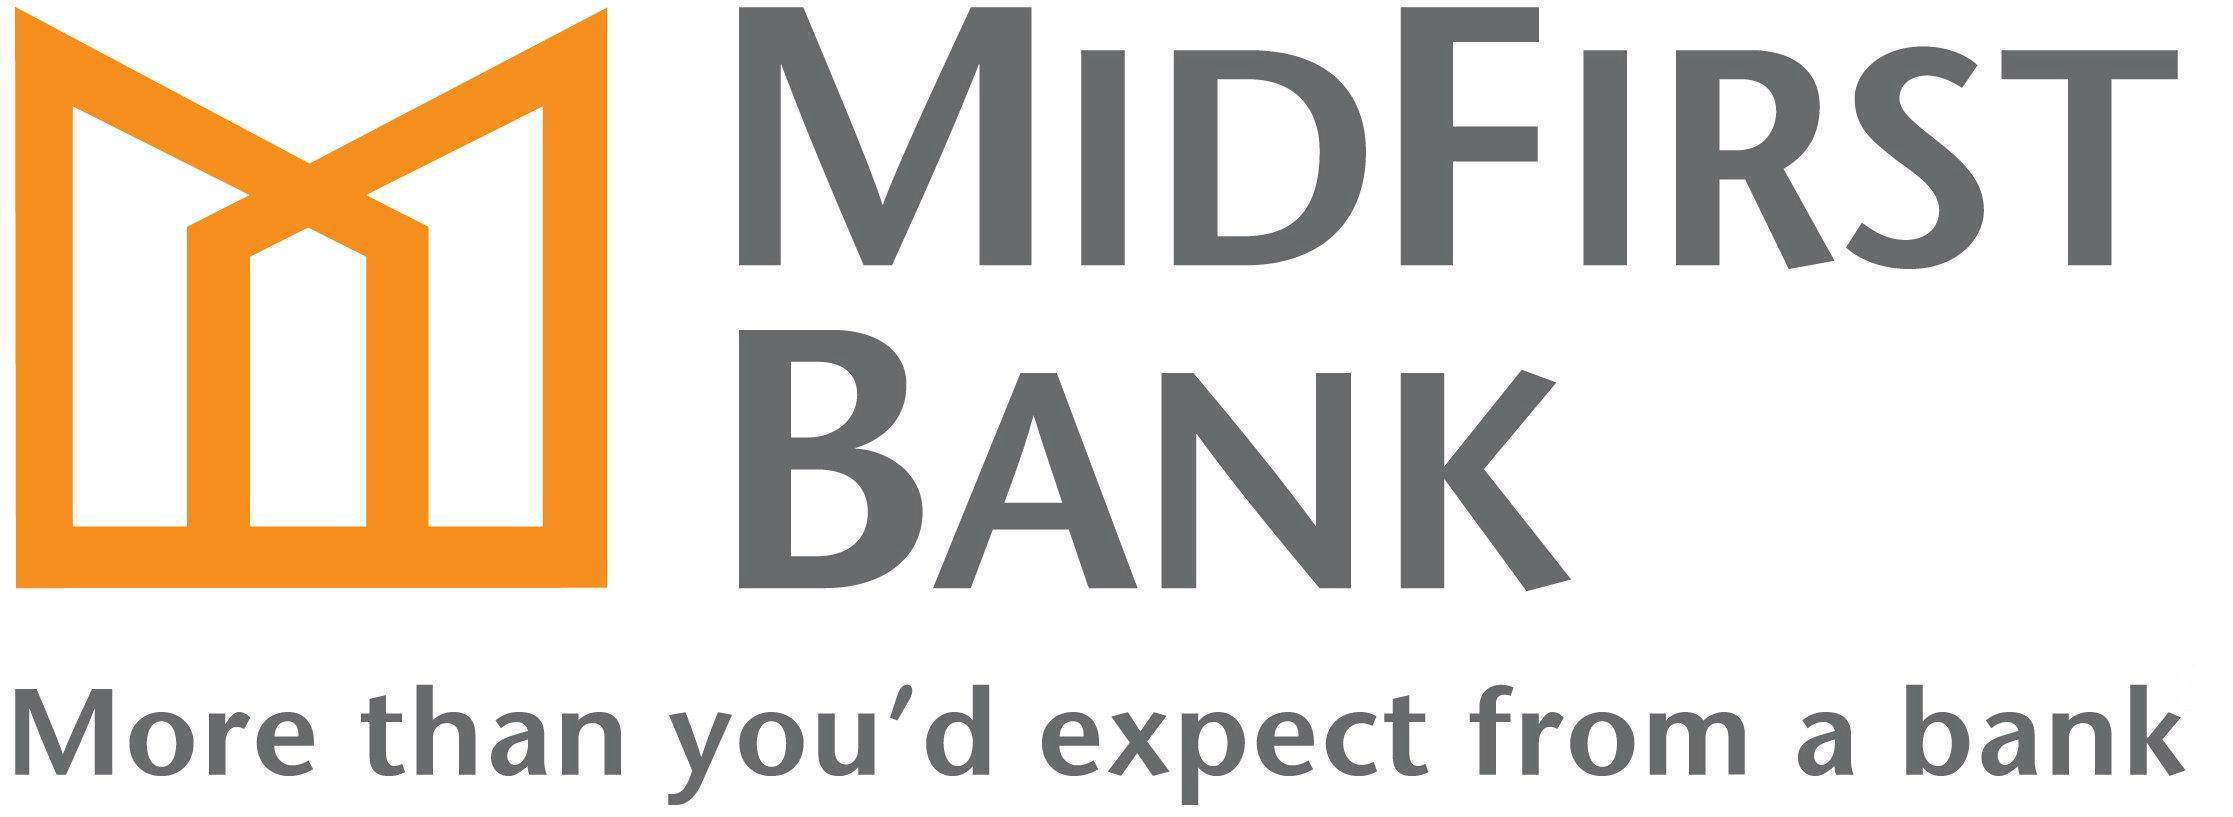 Trademark Logo MIDFIRST BANK MORE THAN YOU'D EXPECT FROM A BANK